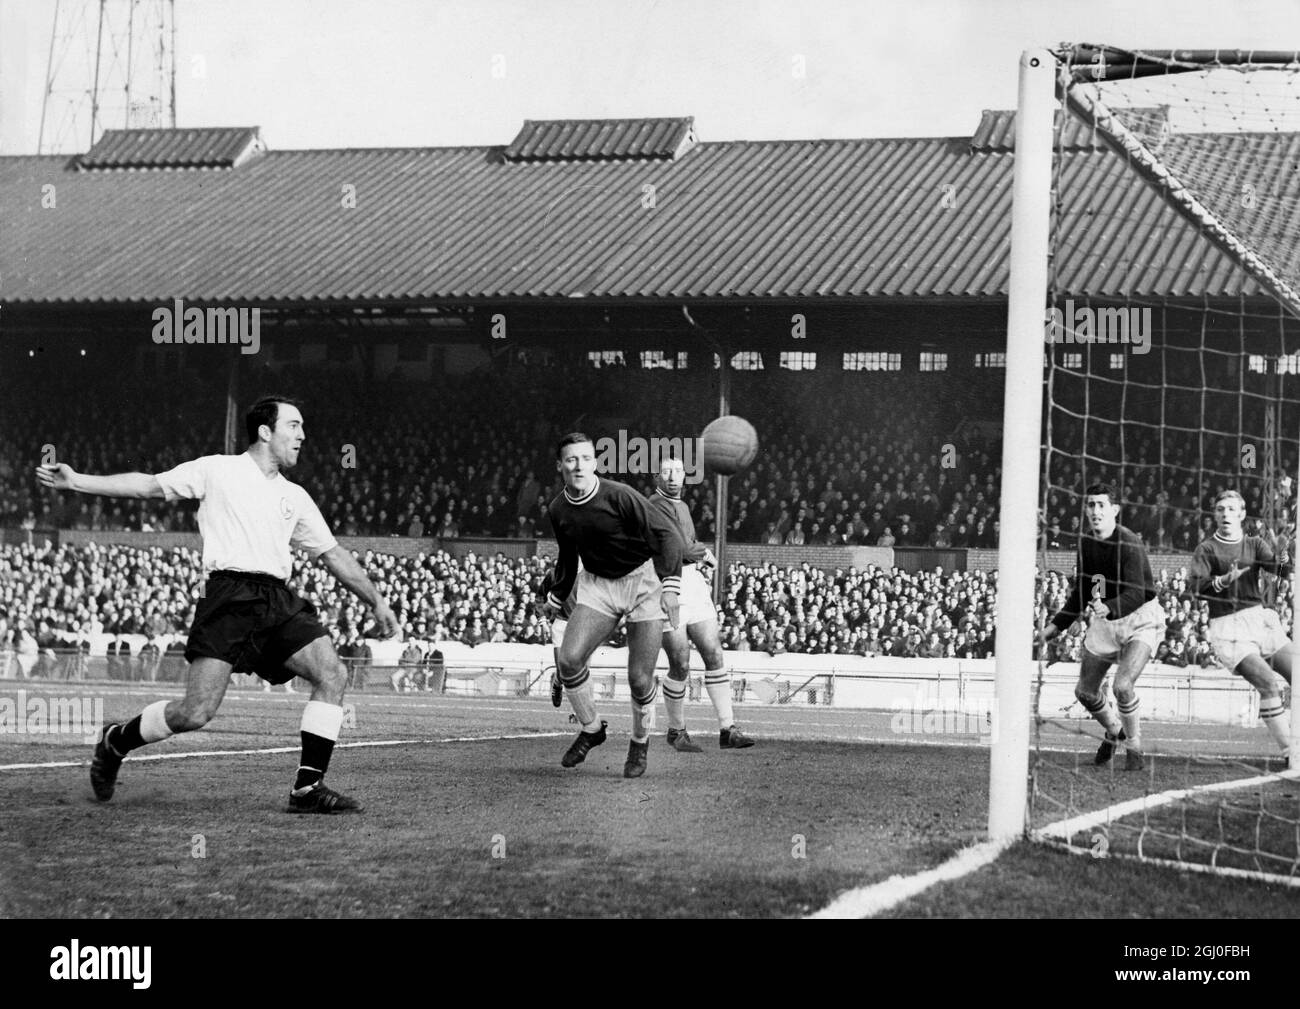 Chelsea v Tottenham Hotspur Jimmy Greaves, Tottenham's inside left, playing against his old club for the first time since returning from Milan, scores his team's first goal during the match at Stamford Bridge. 26th December 1961. Stock Photo